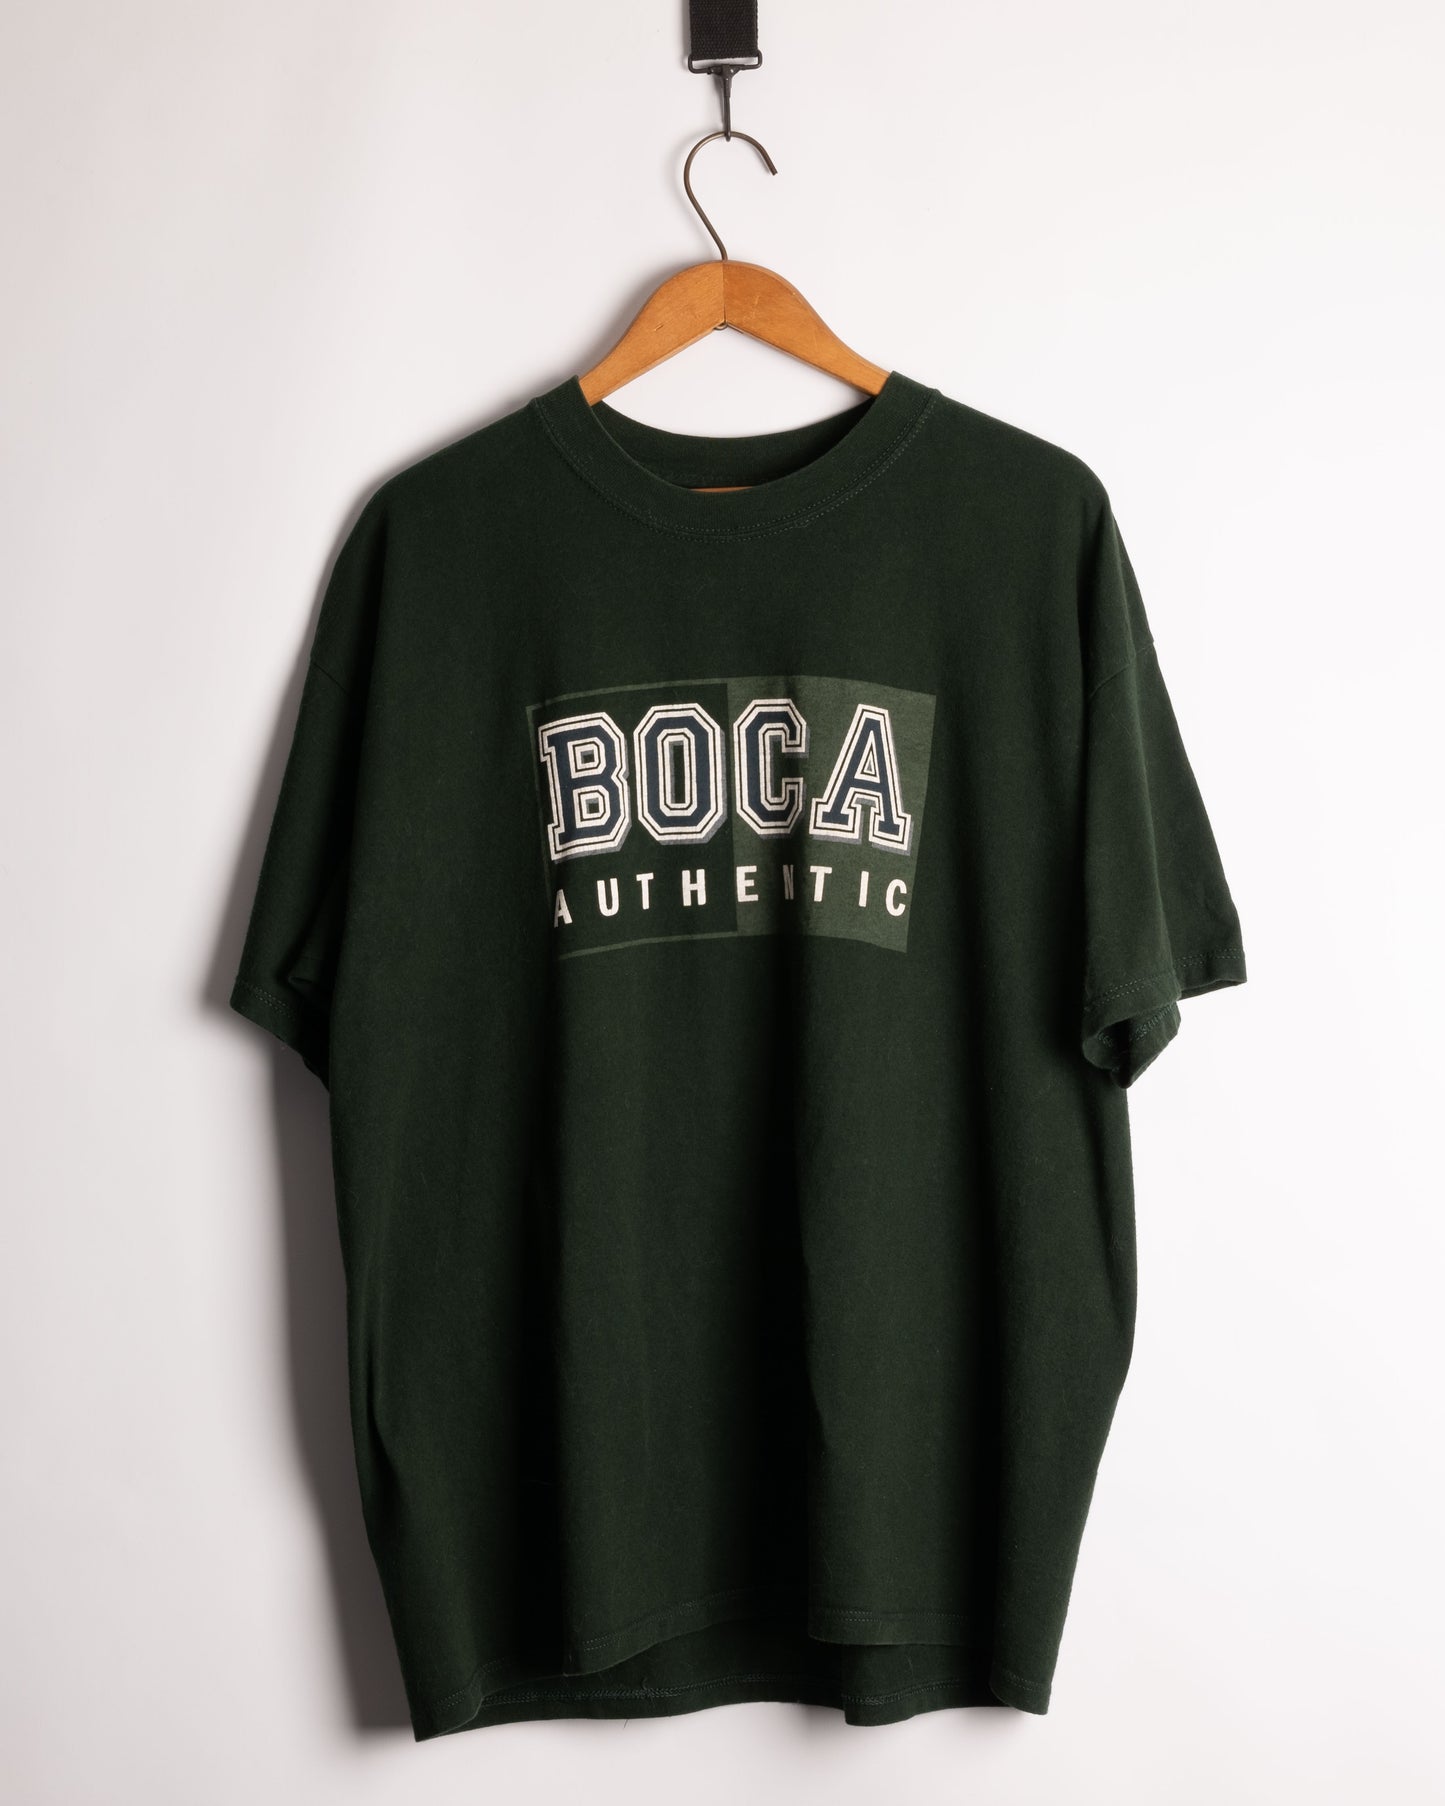 Forest green BOCA t-shirt - made in Canada - large